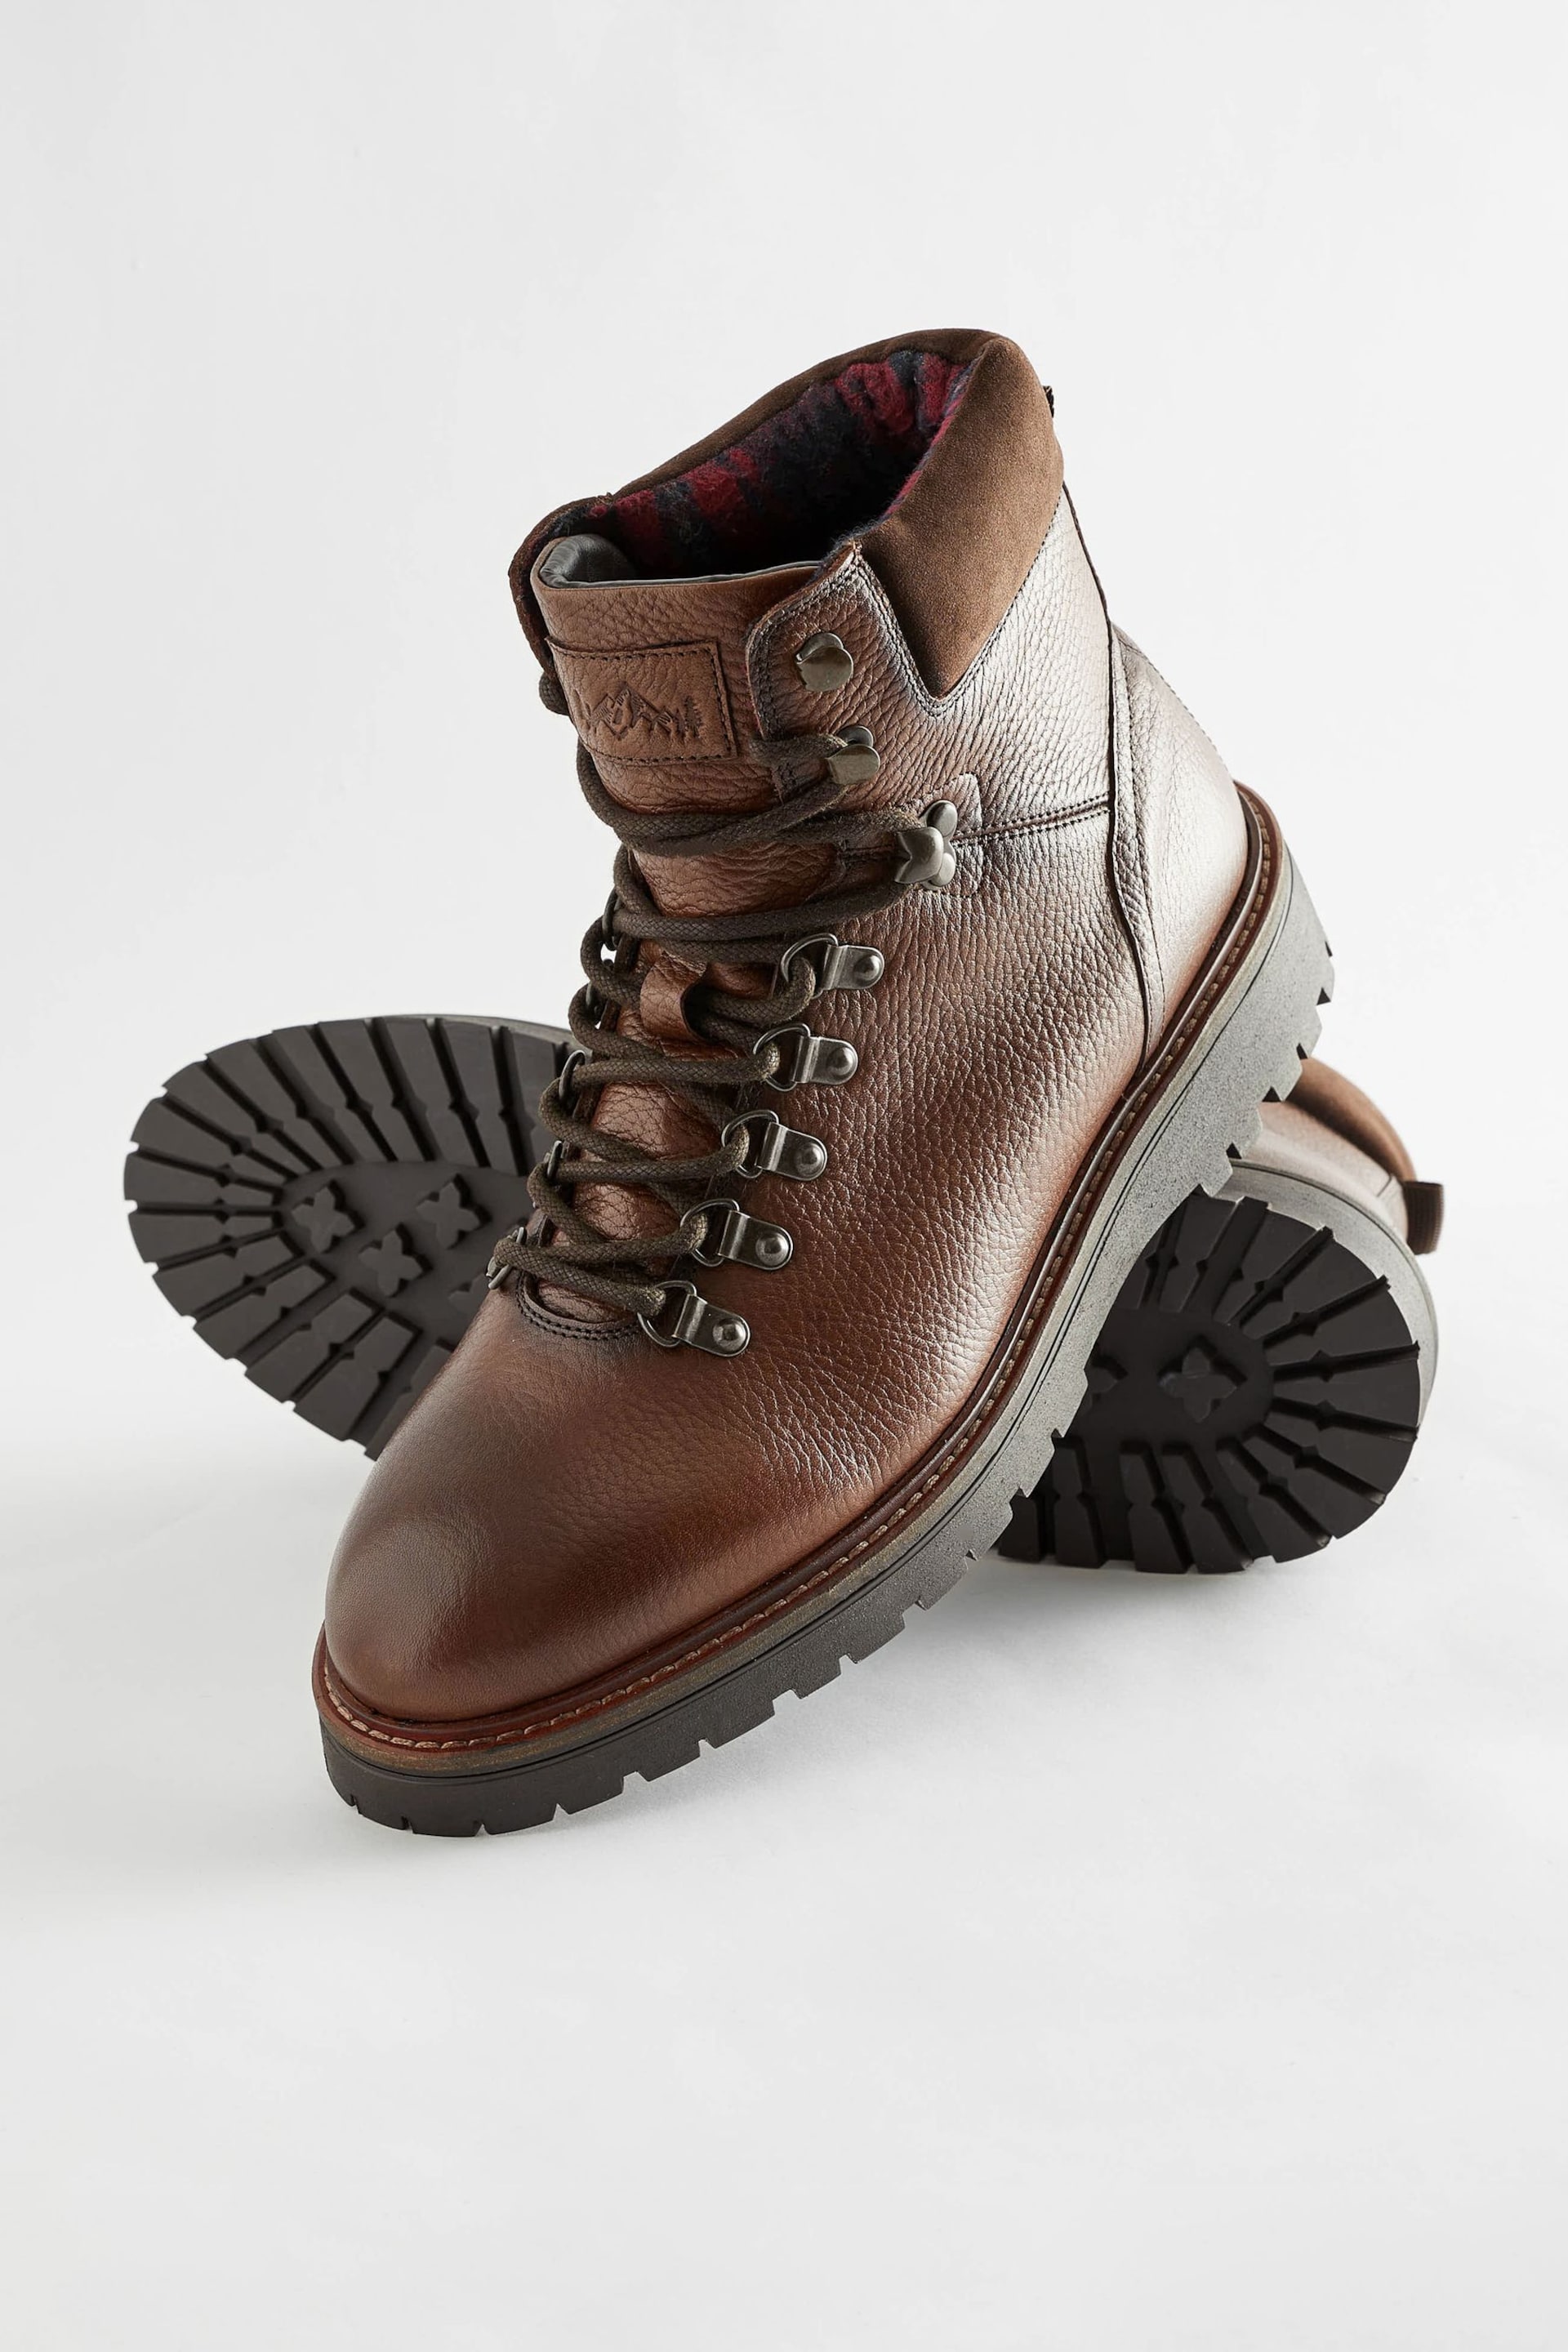 Brown Leather Hiker Style Boots - Image 5 of 6